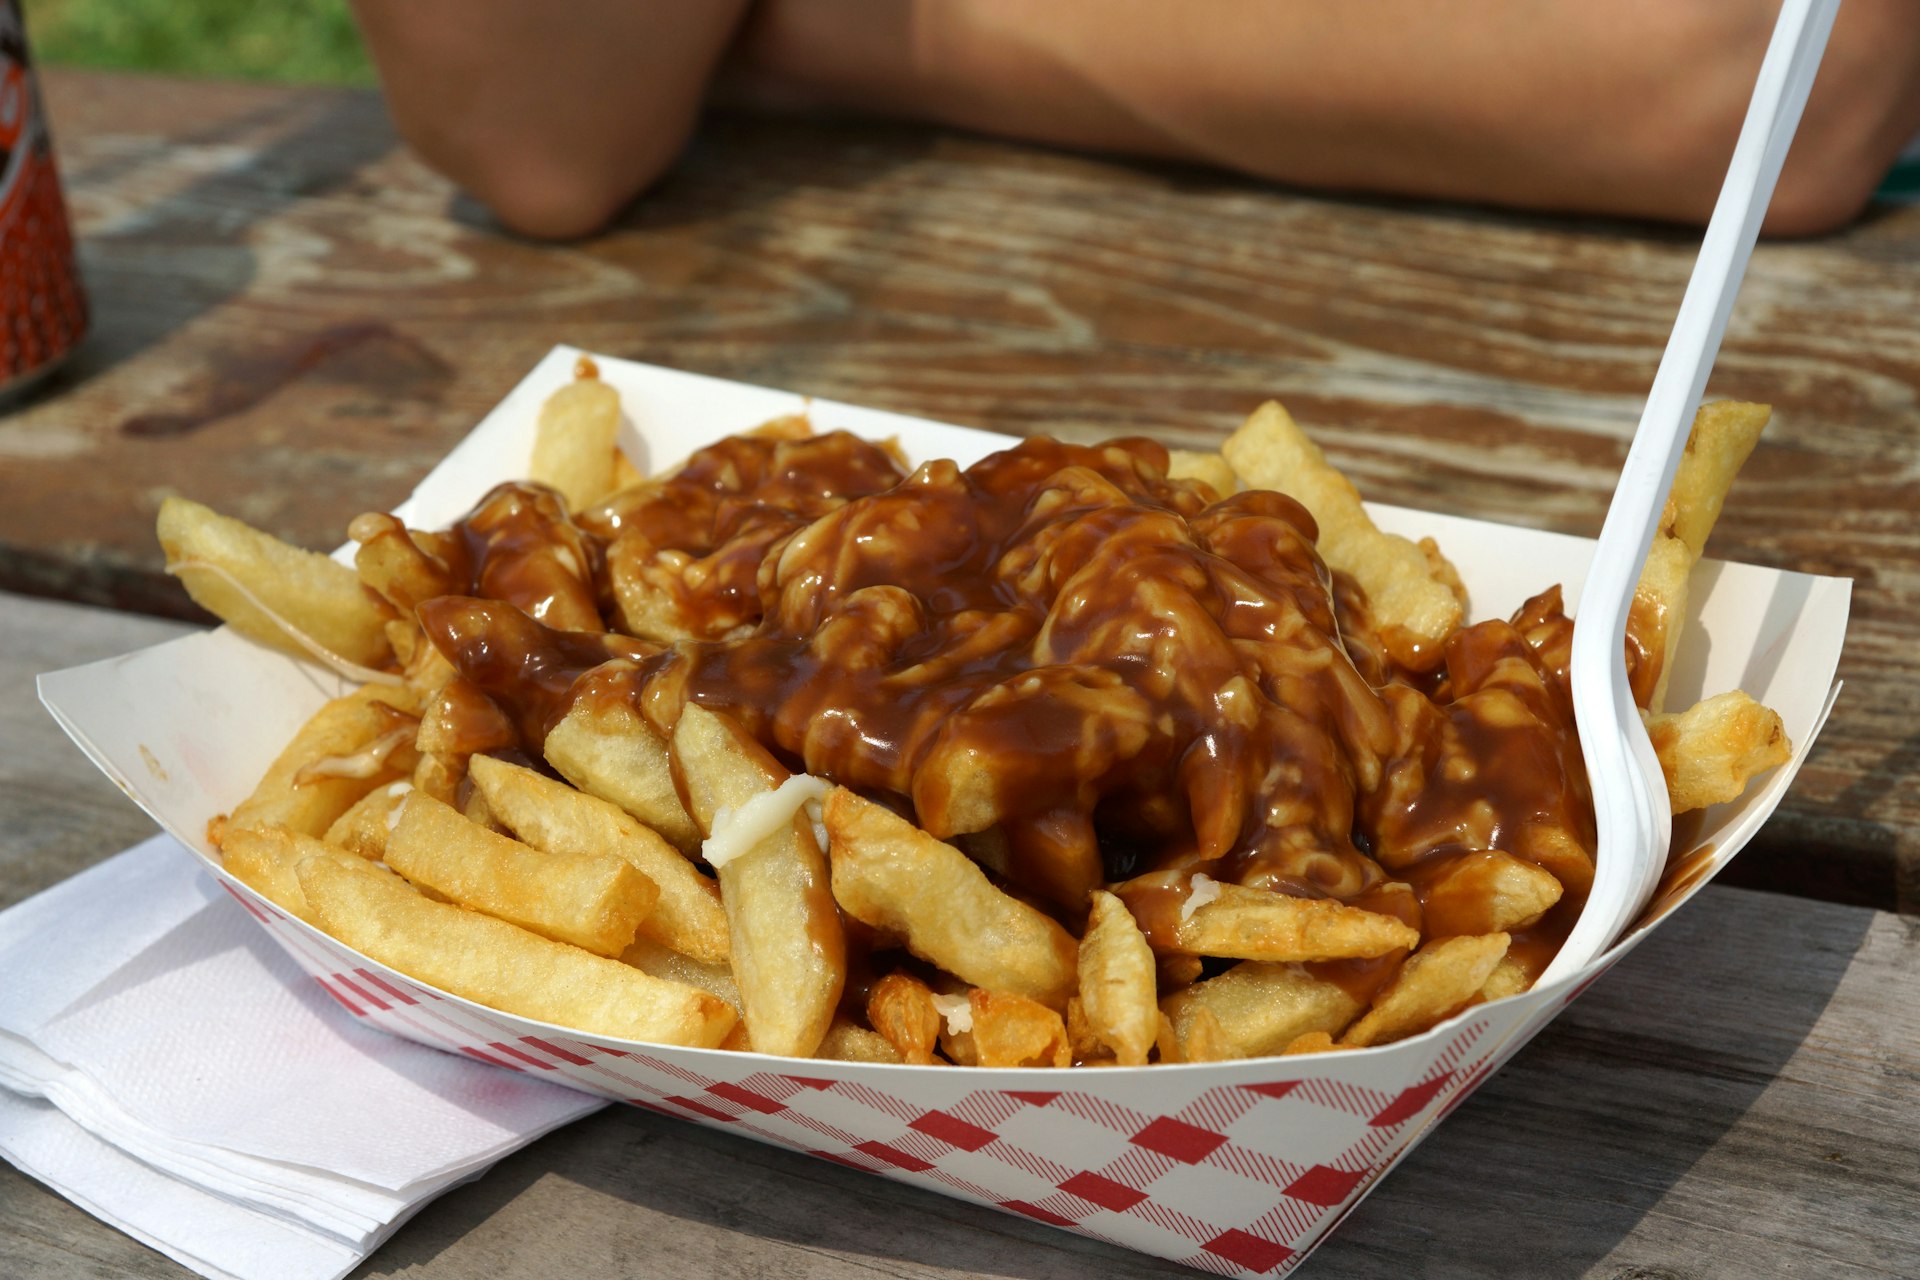 A take-out order of poutine on a picnic table in Canada